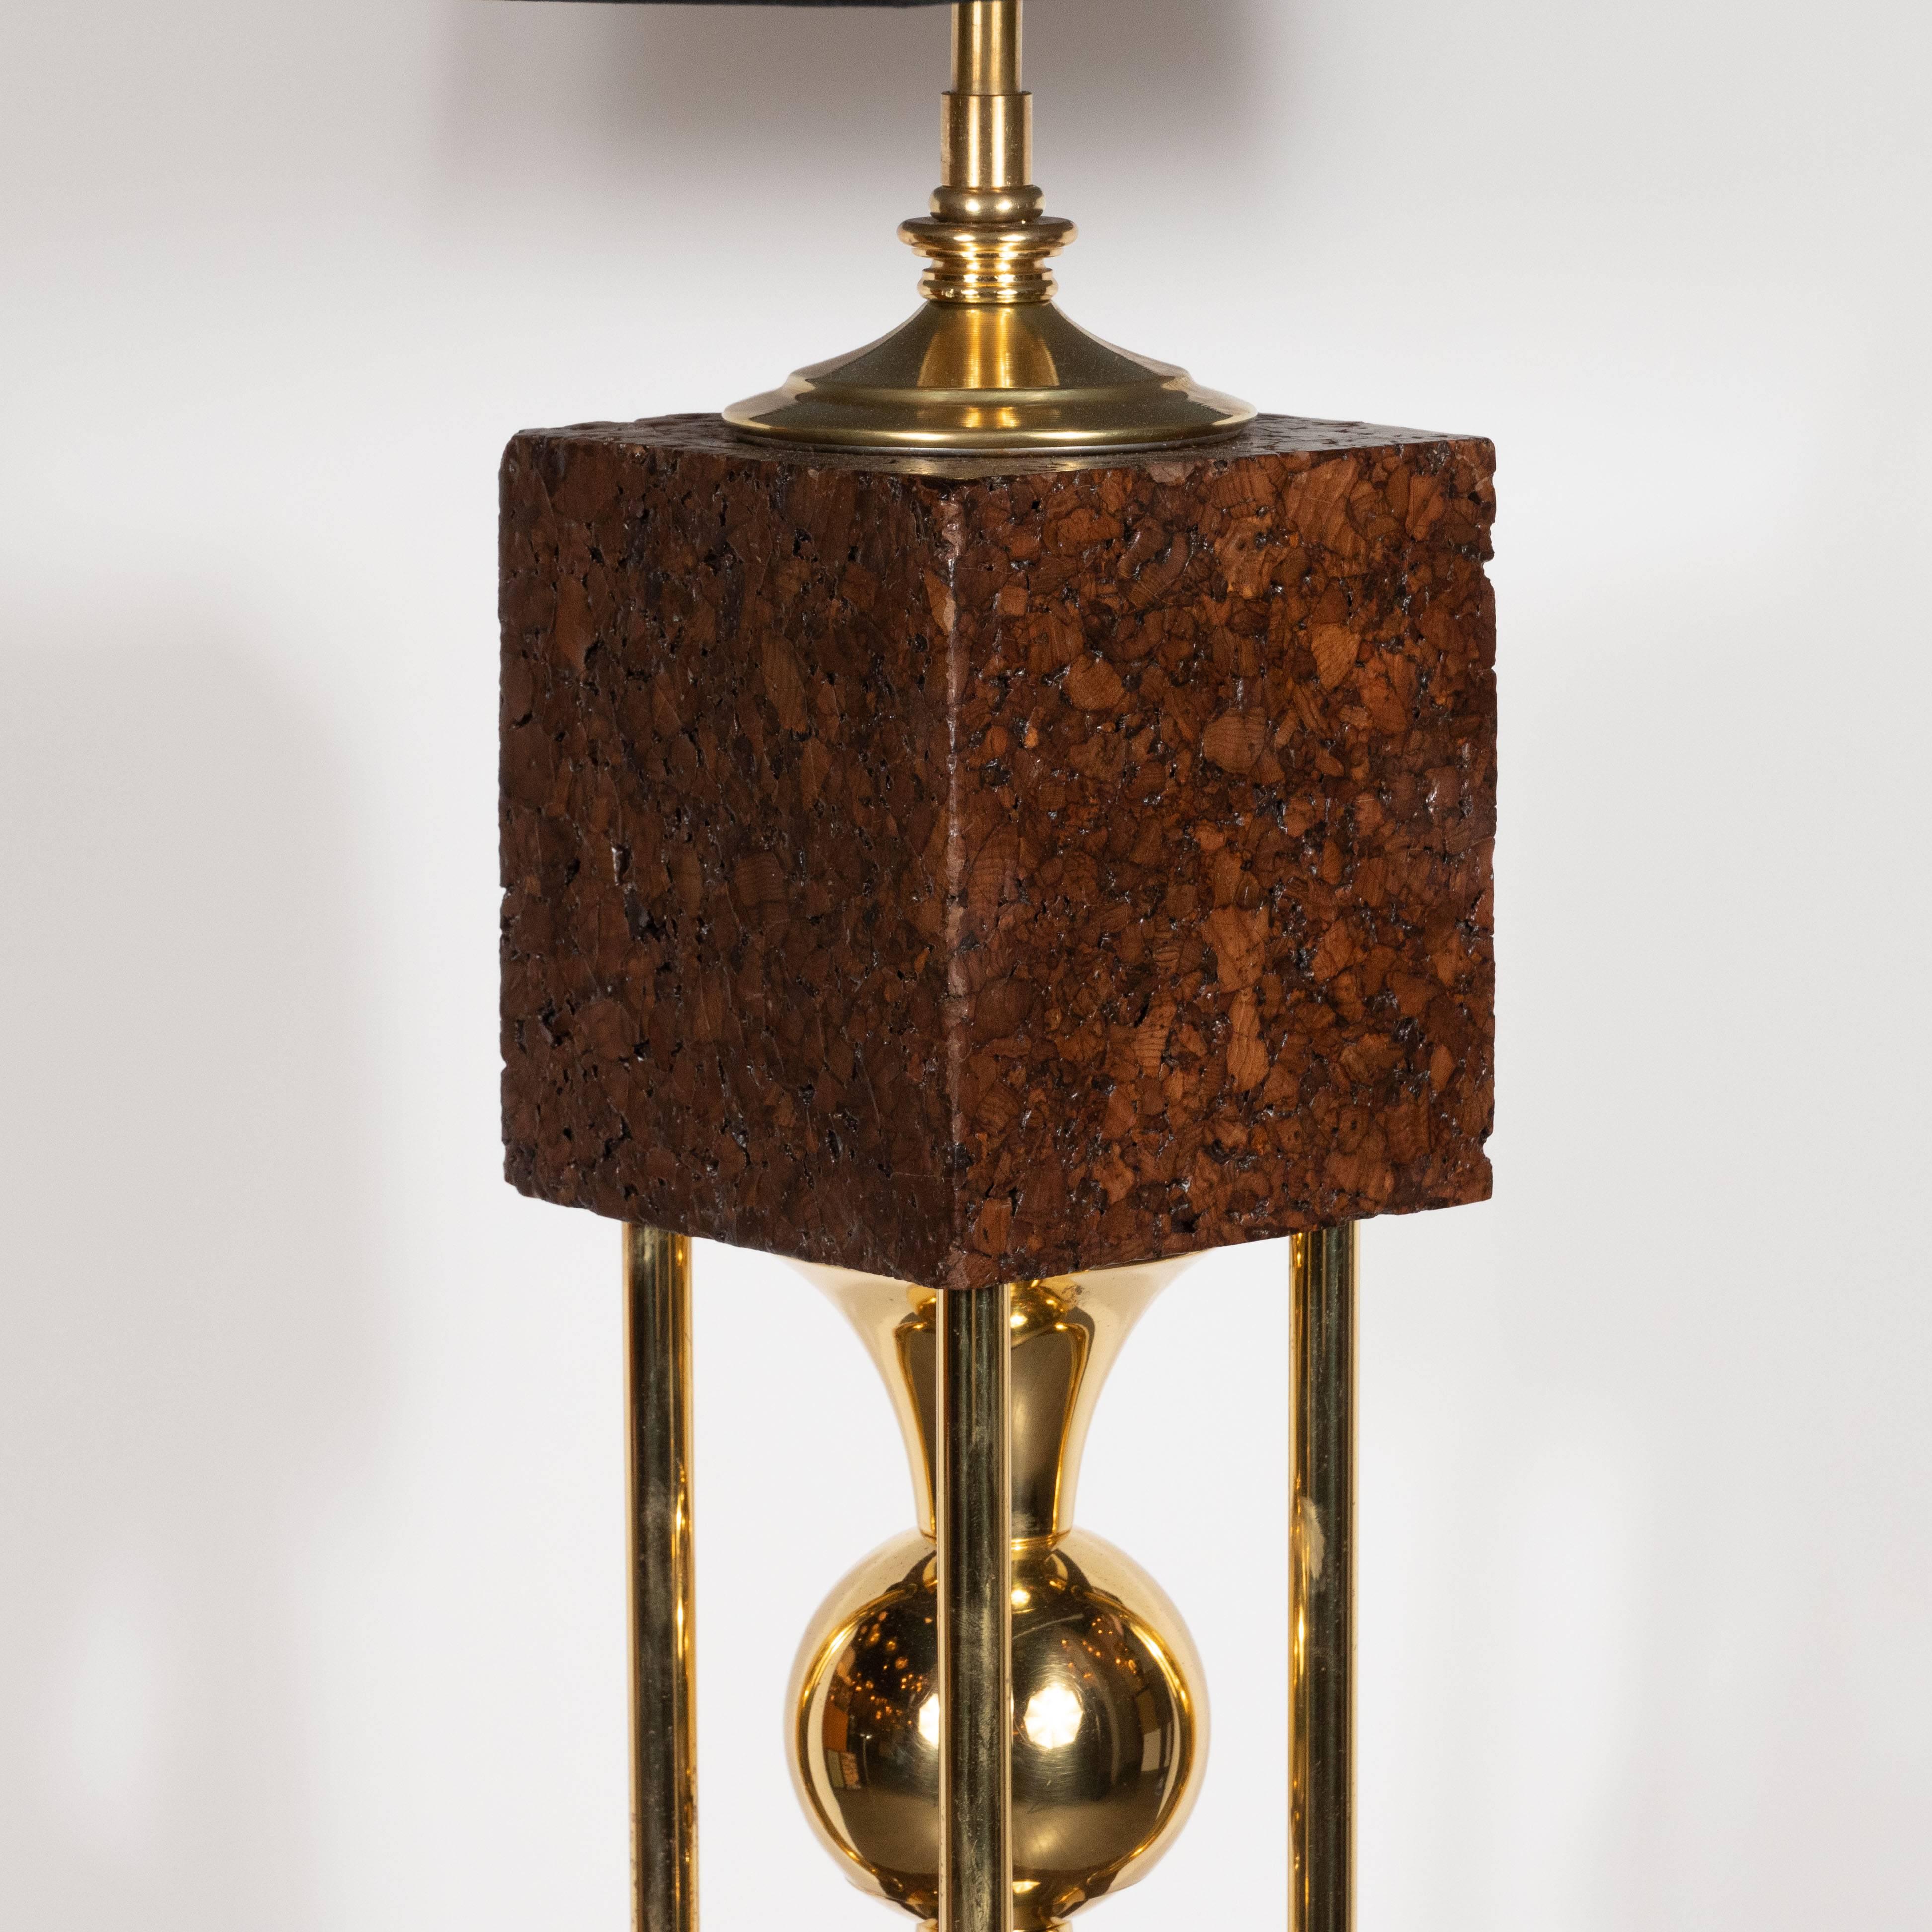 Pair of Sculptural Mid-Century Modern Polished Brass and Cork Table Lamps 1